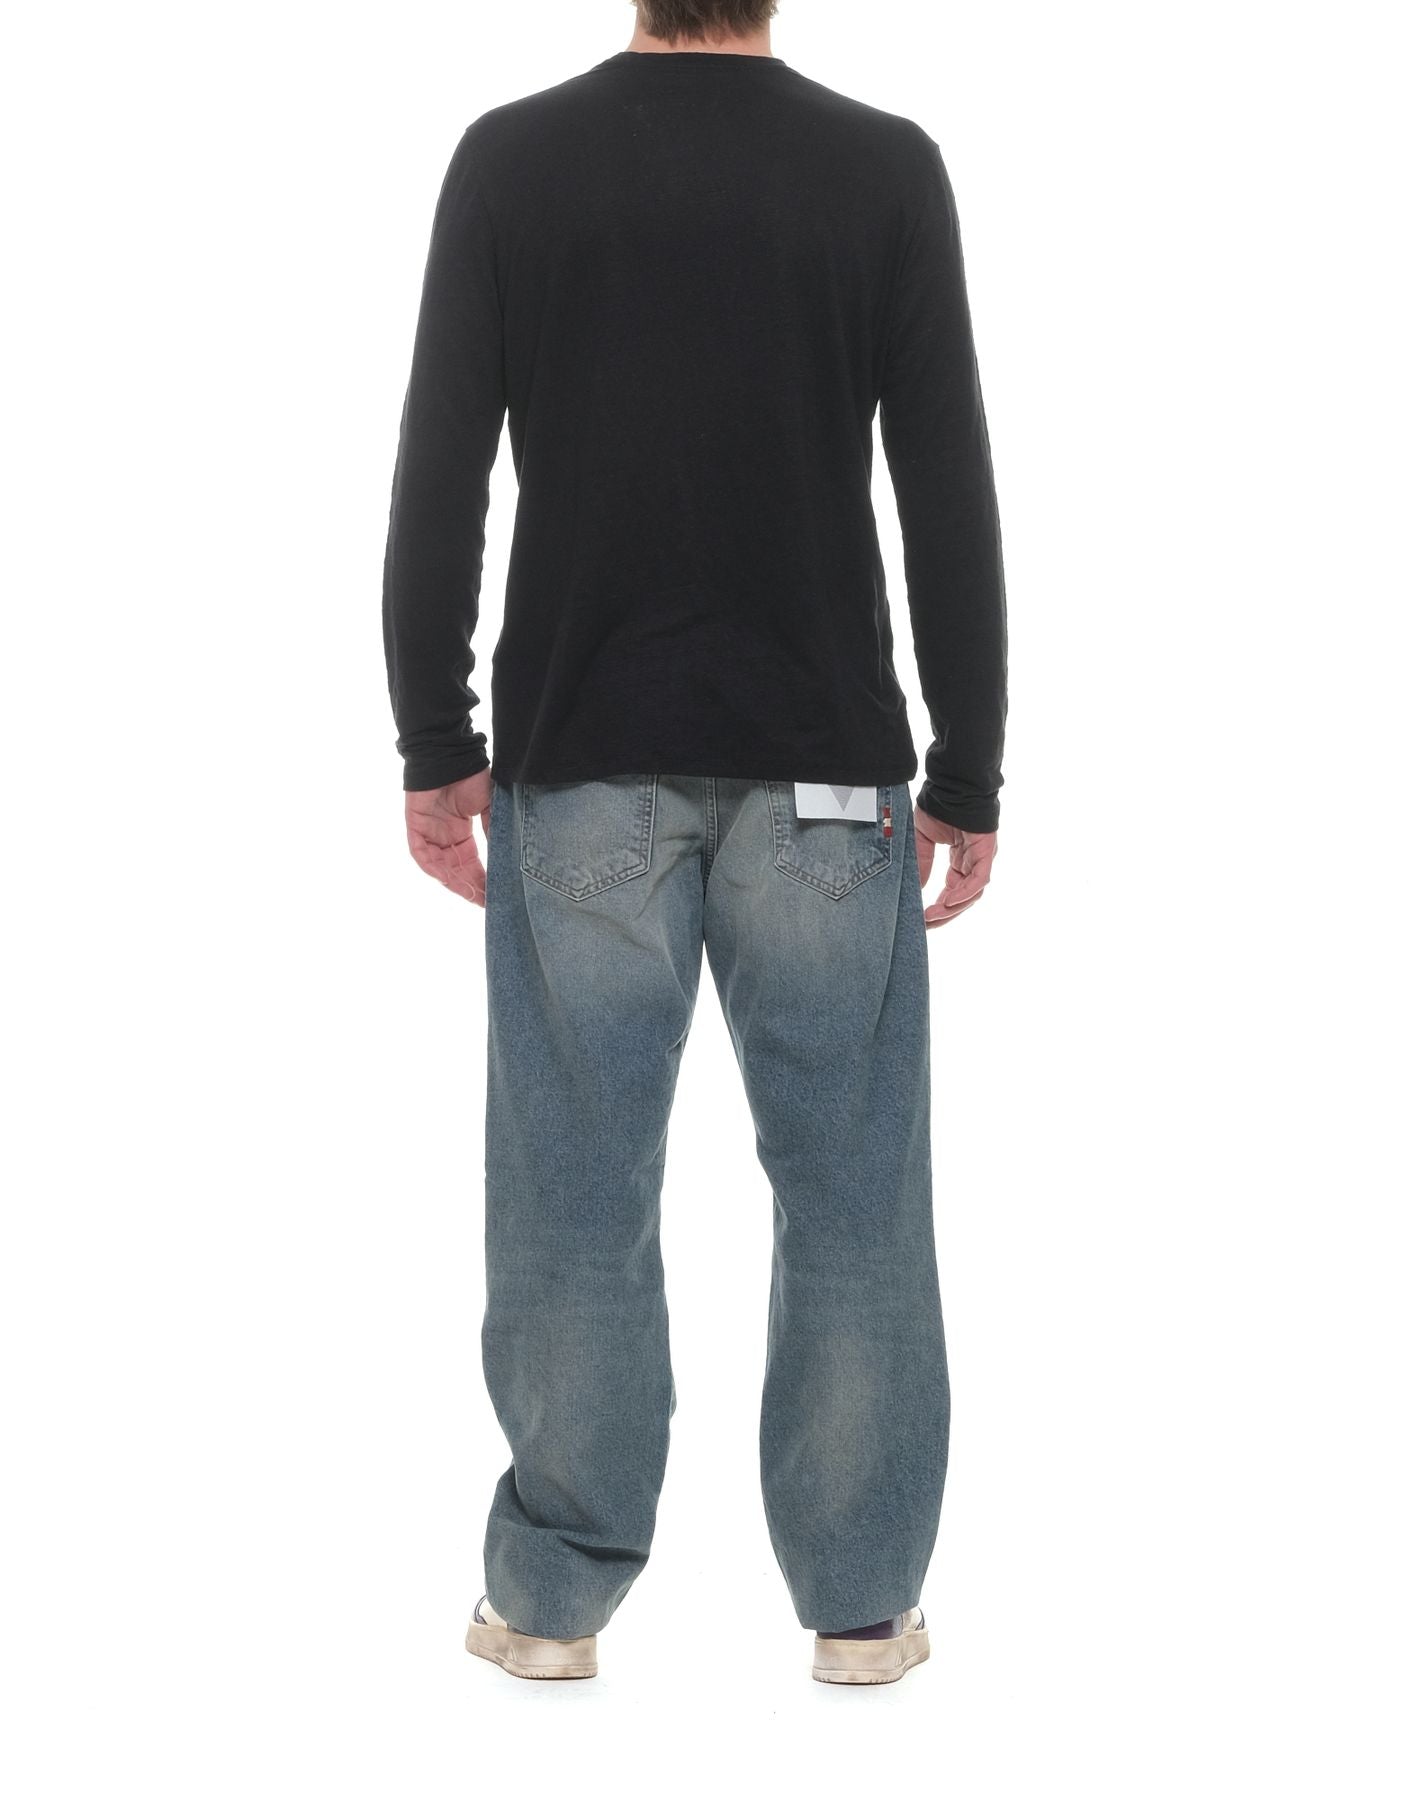 Jeans for man AMU010D4692504 SUPER DIRTY Amish